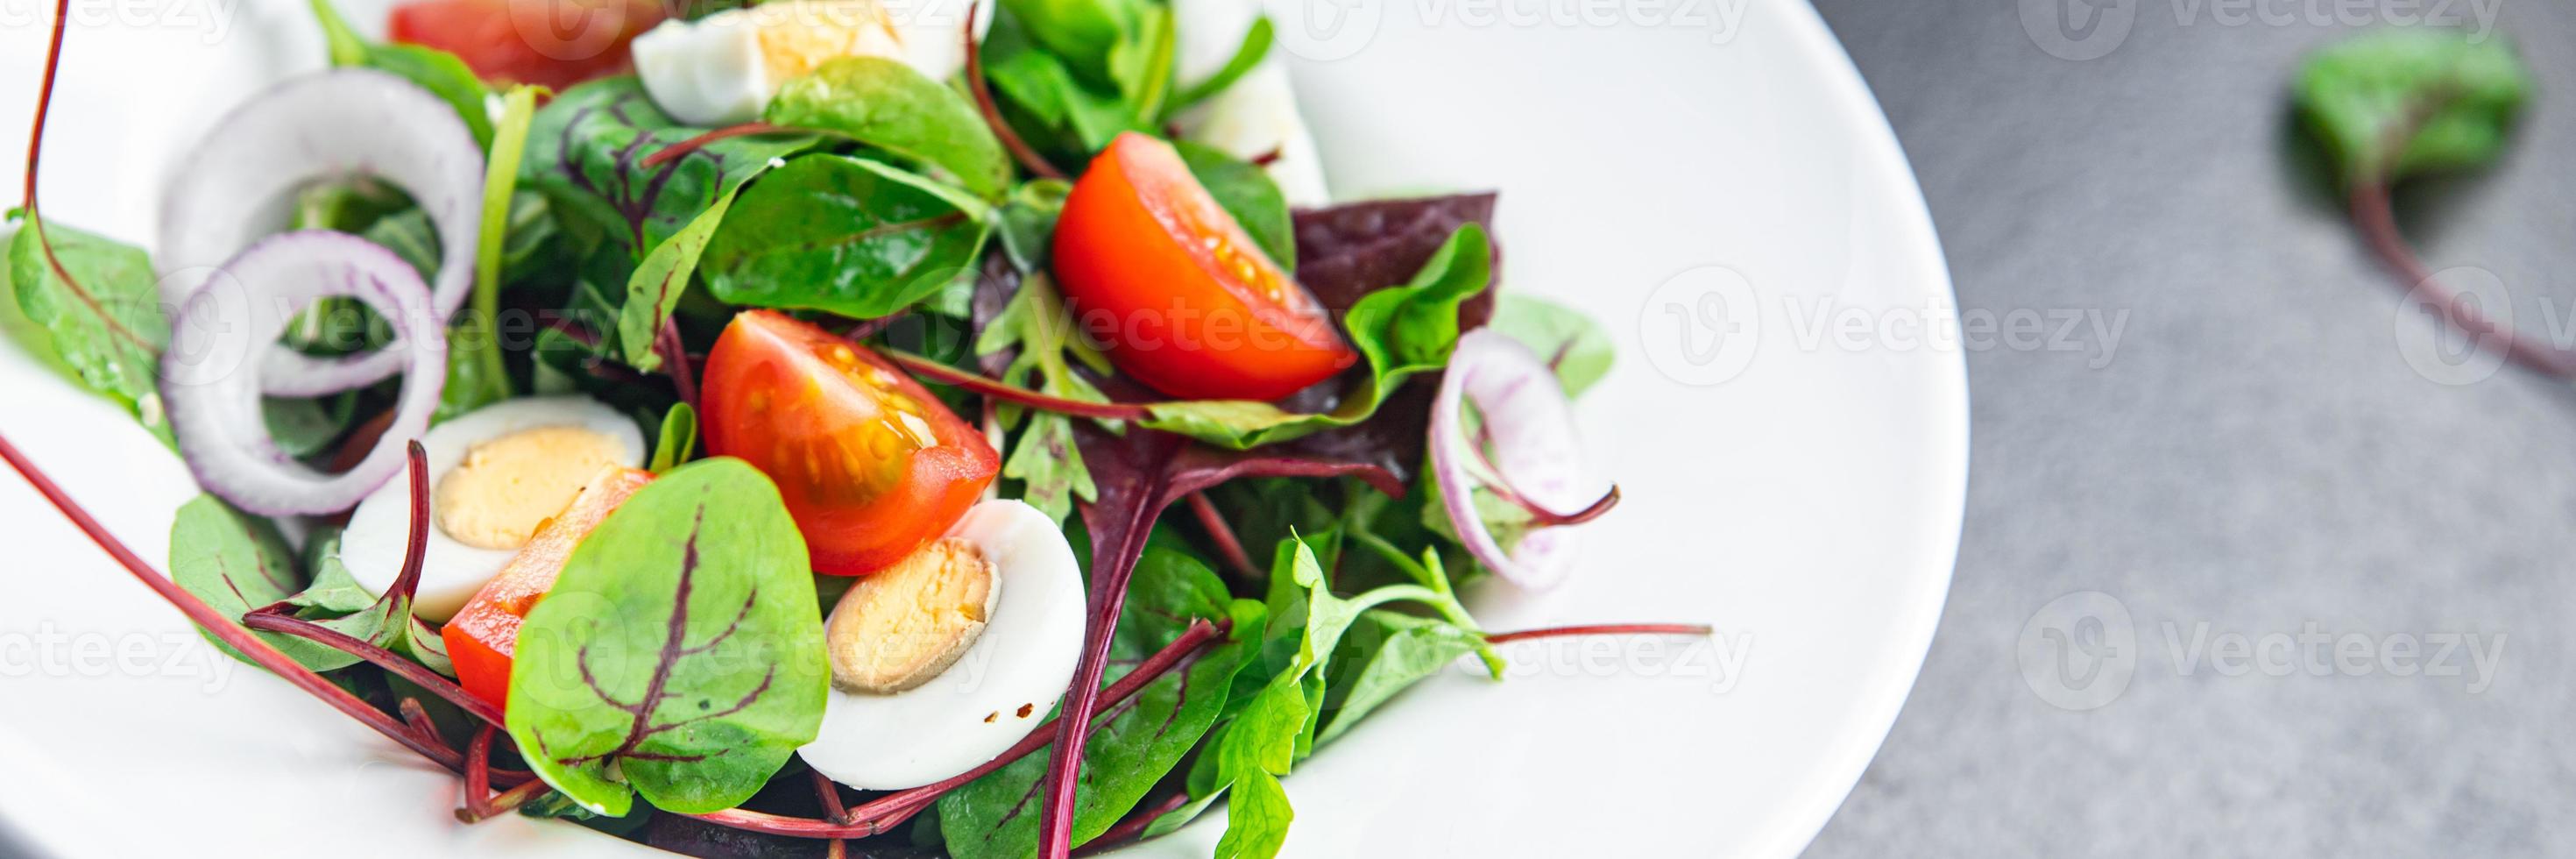 salad quail egg tomato, lettuce mix leaves healthy meal keto or paleo diet photo